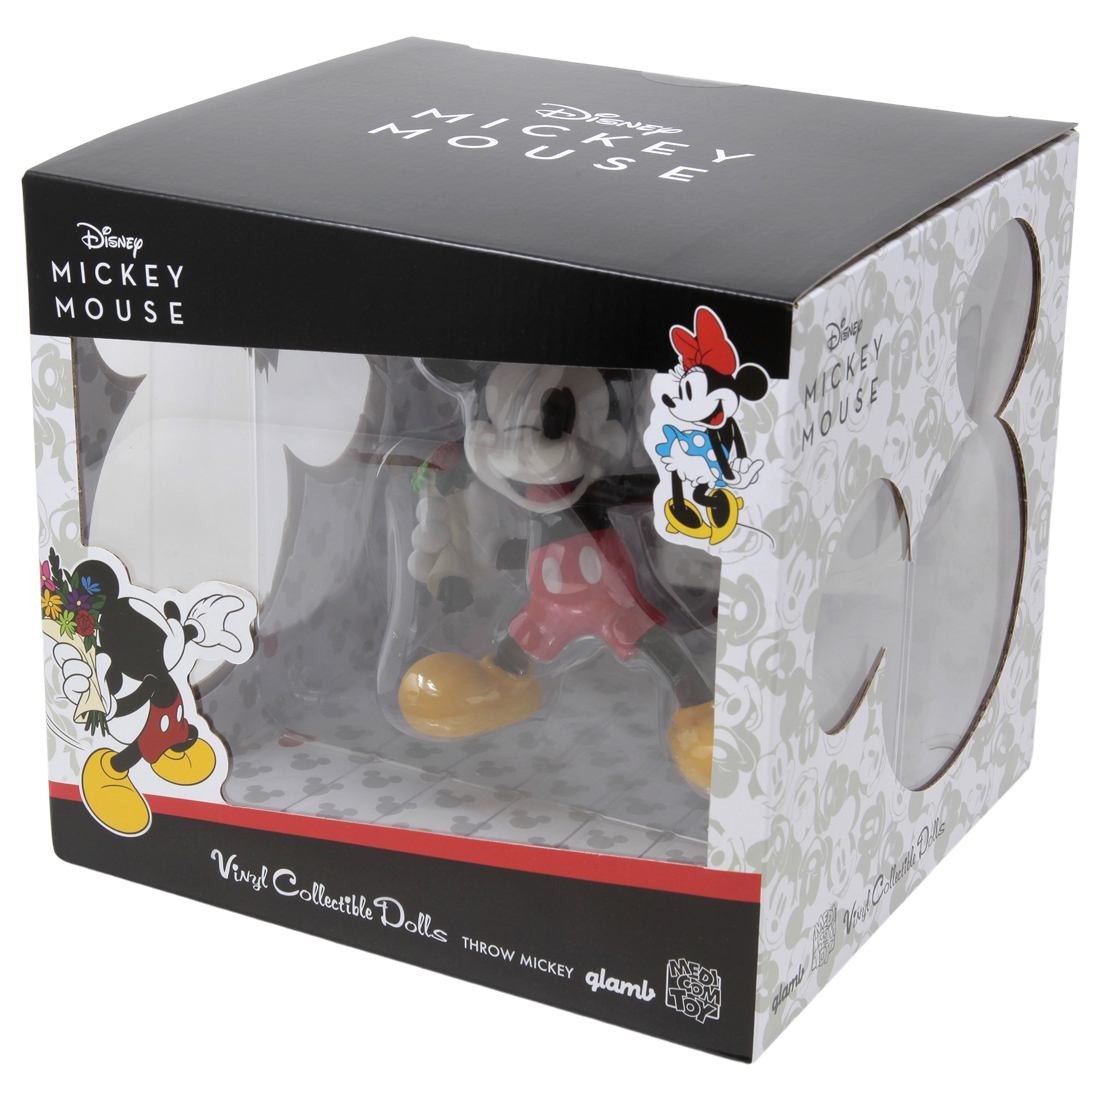 Disney Vinyl Collectible Dolls for sale online 2018 Medicom Toy VCD Mickey Mouse Astronaut Ver 